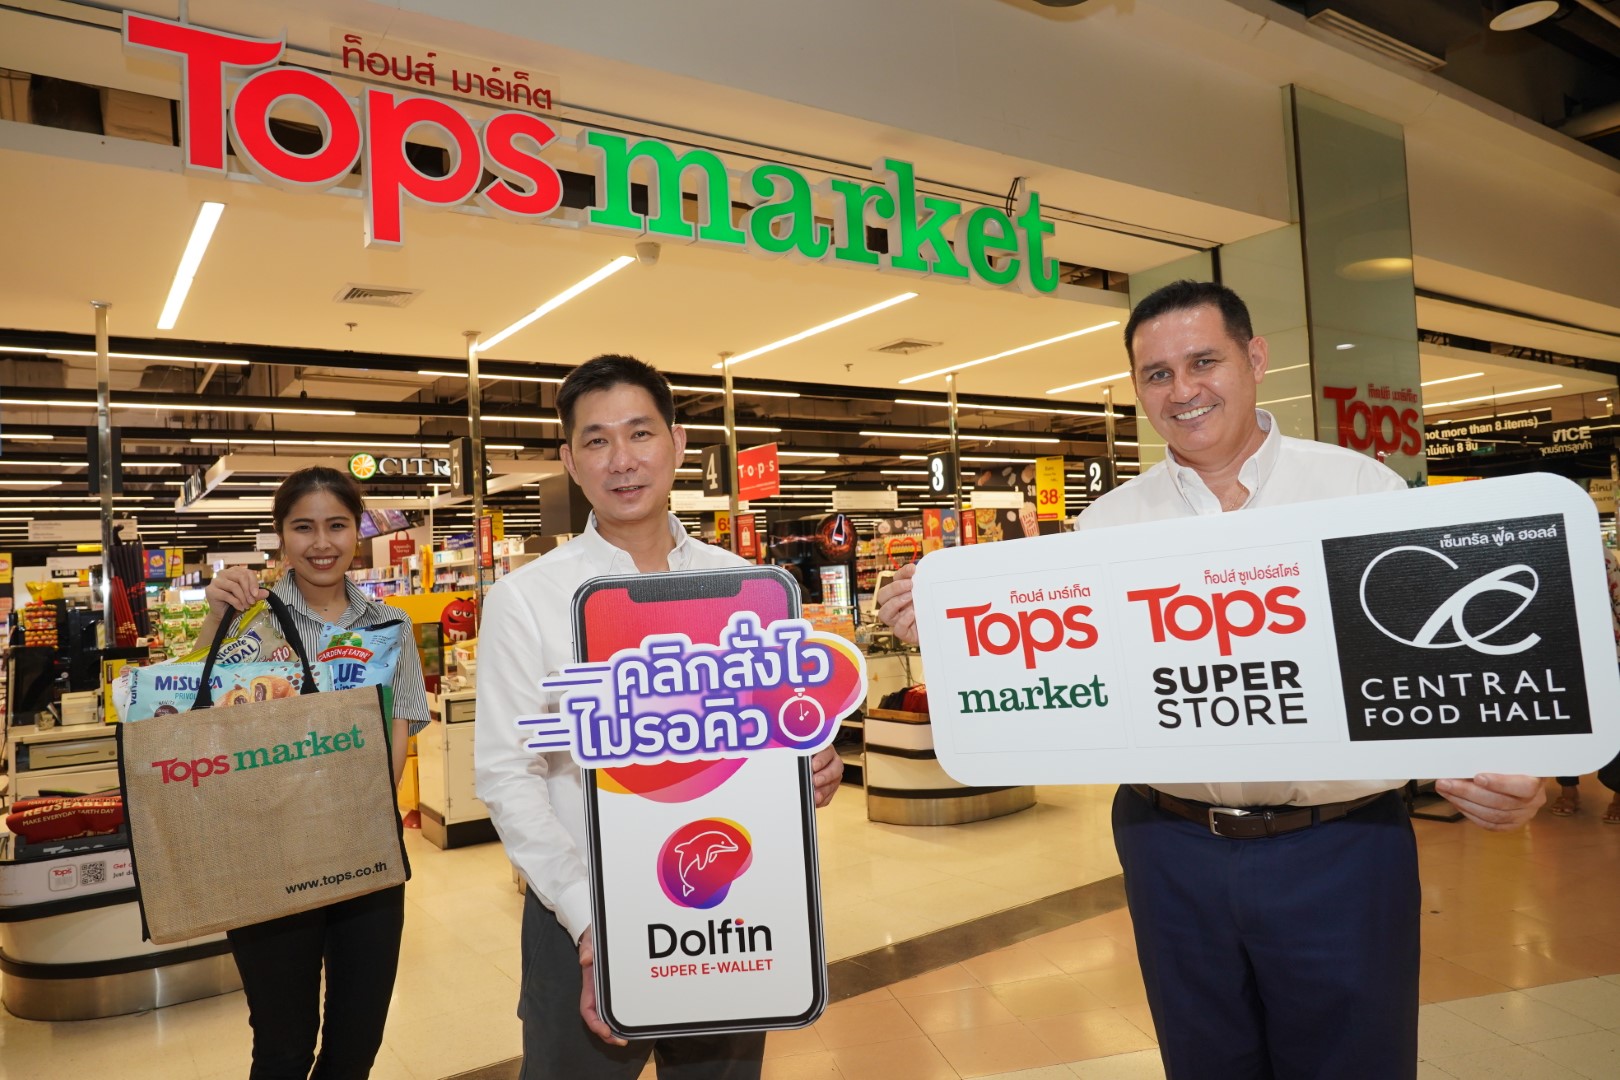 Dolfin Application under Central Group partners with Tops to offer a quick 2-hour 'Order and Collect service catering to the new normal lifestyle